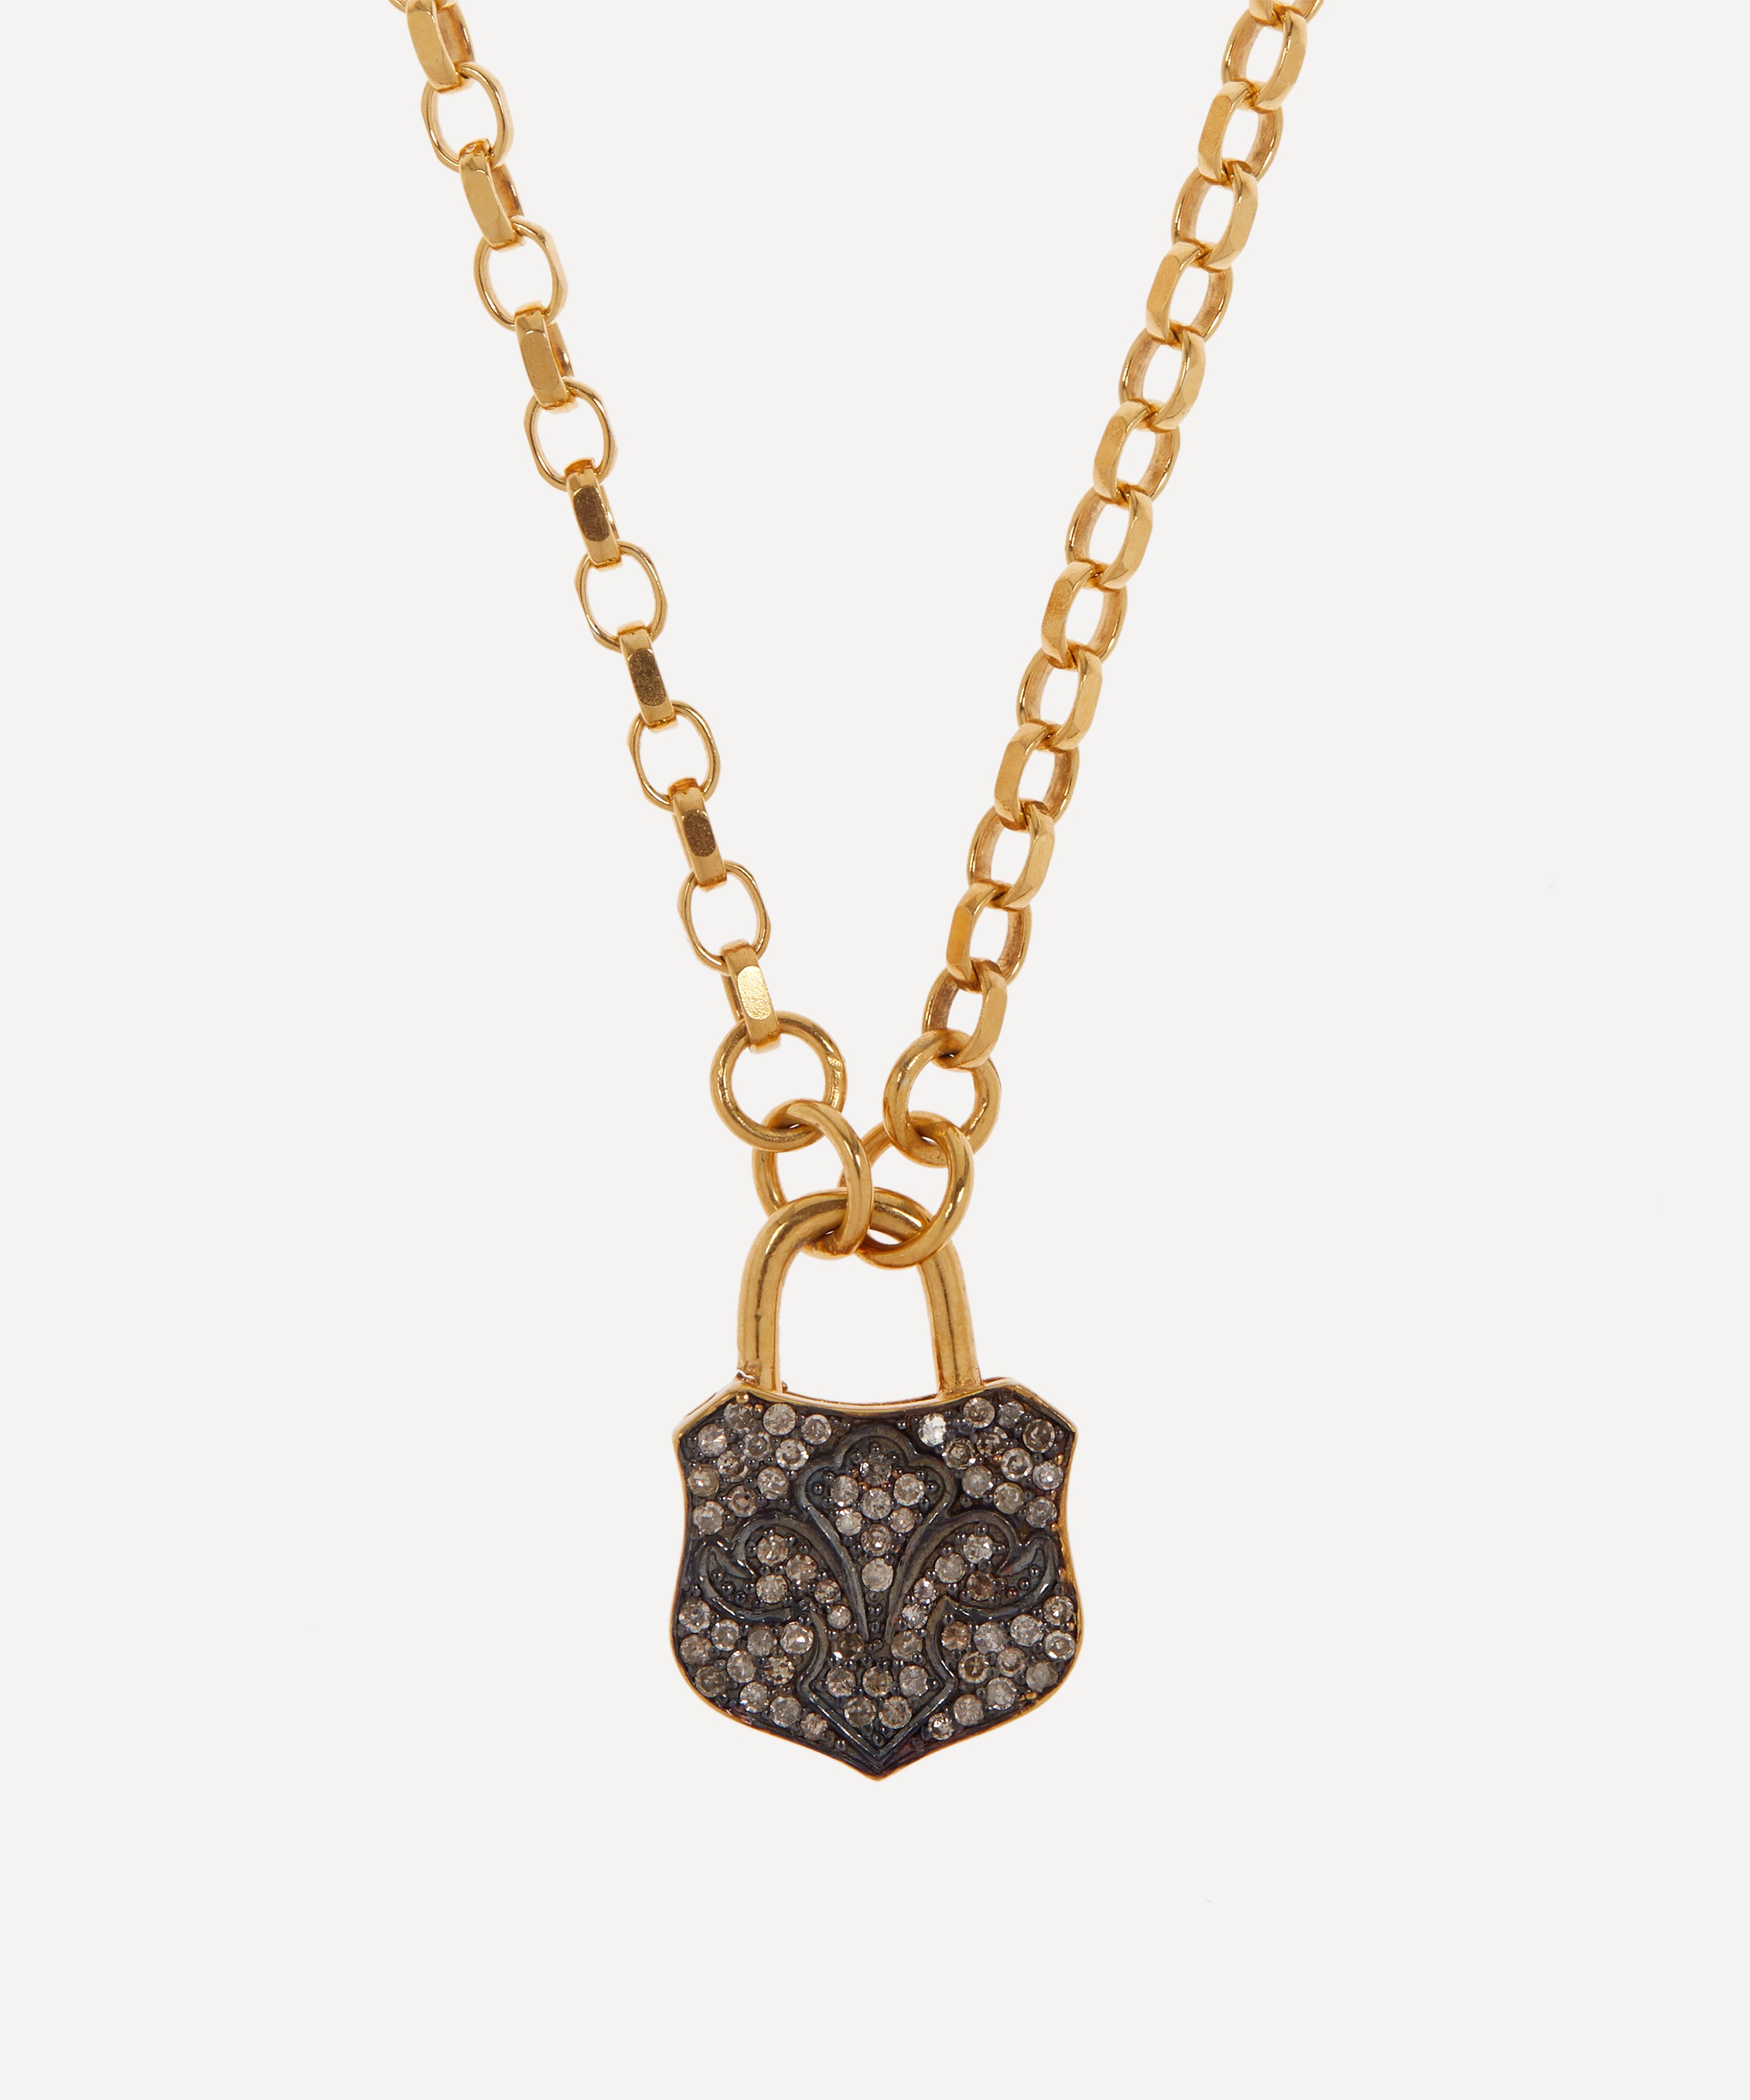 Kirstie Le Marque 9ct Gold-Plated Diamond Chunky Lock Pendant Necklace